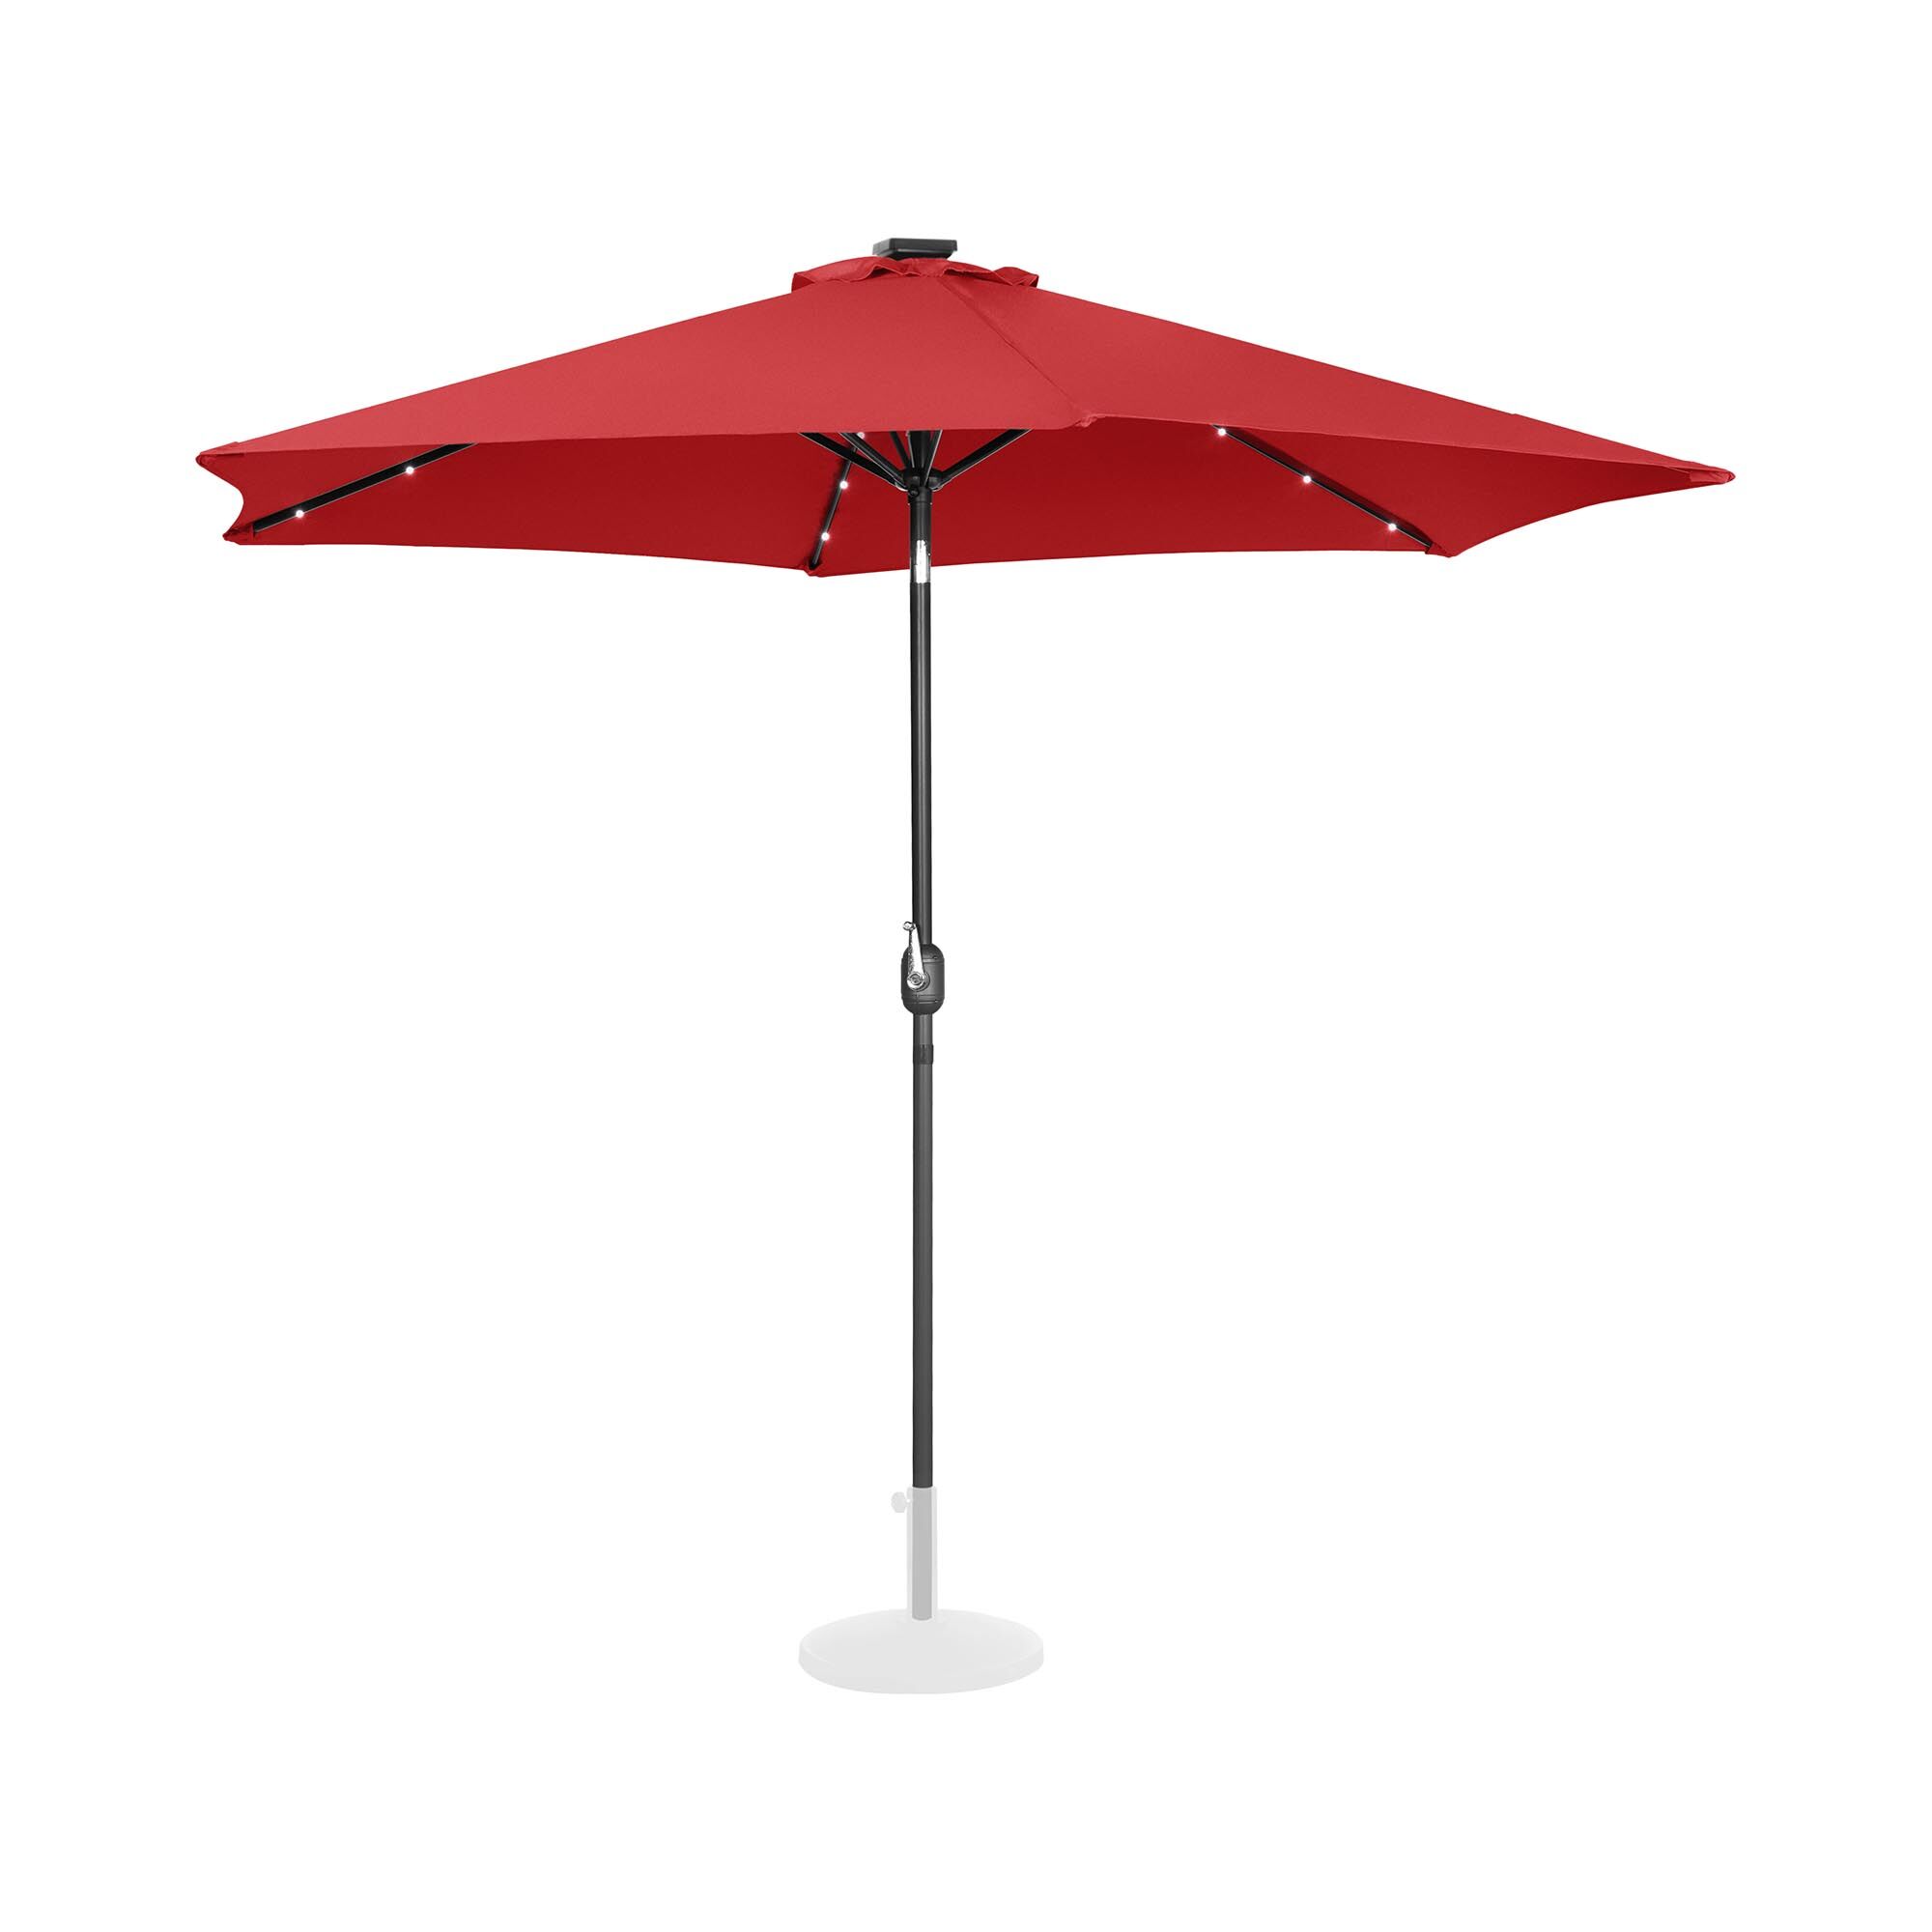 Uniprodo Parasol with lights - red - round - Ø 300 cm - tiltable